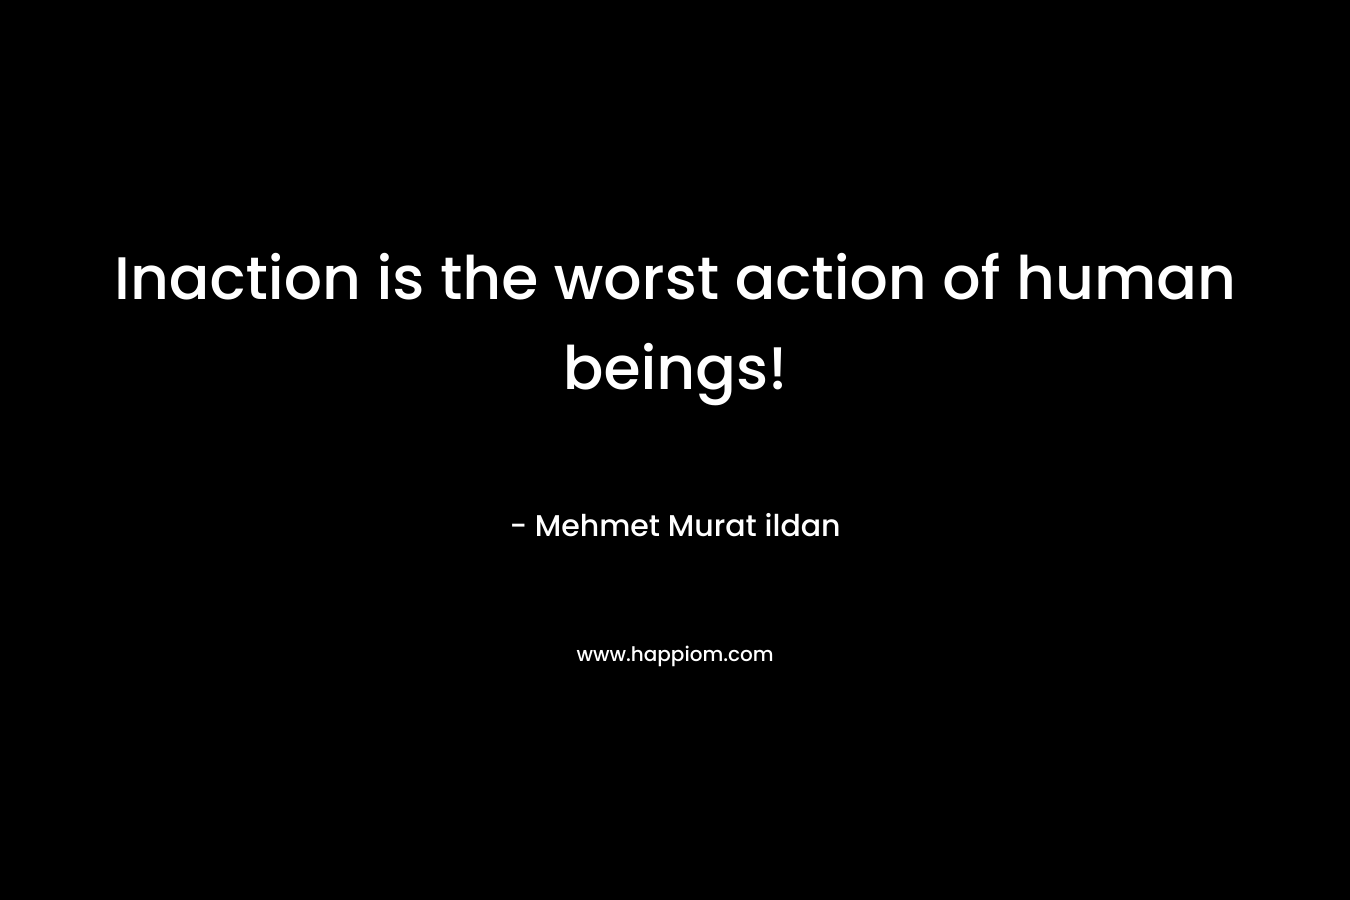 Inaction is the worst action of human beings!